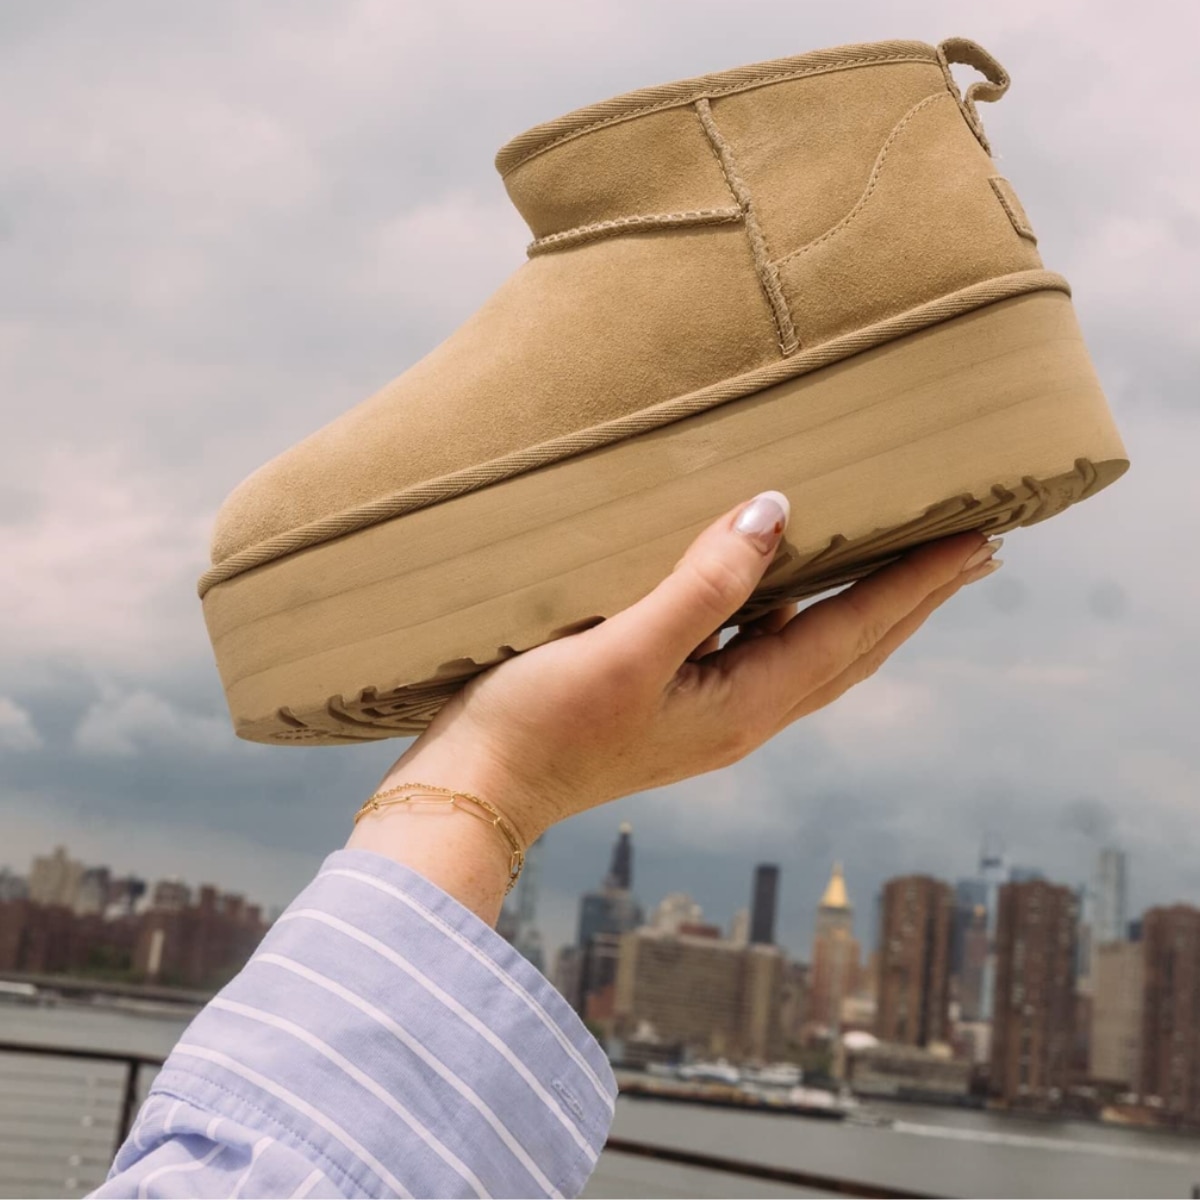 Rare Deal- UGG Boots on Sale for 53% Off